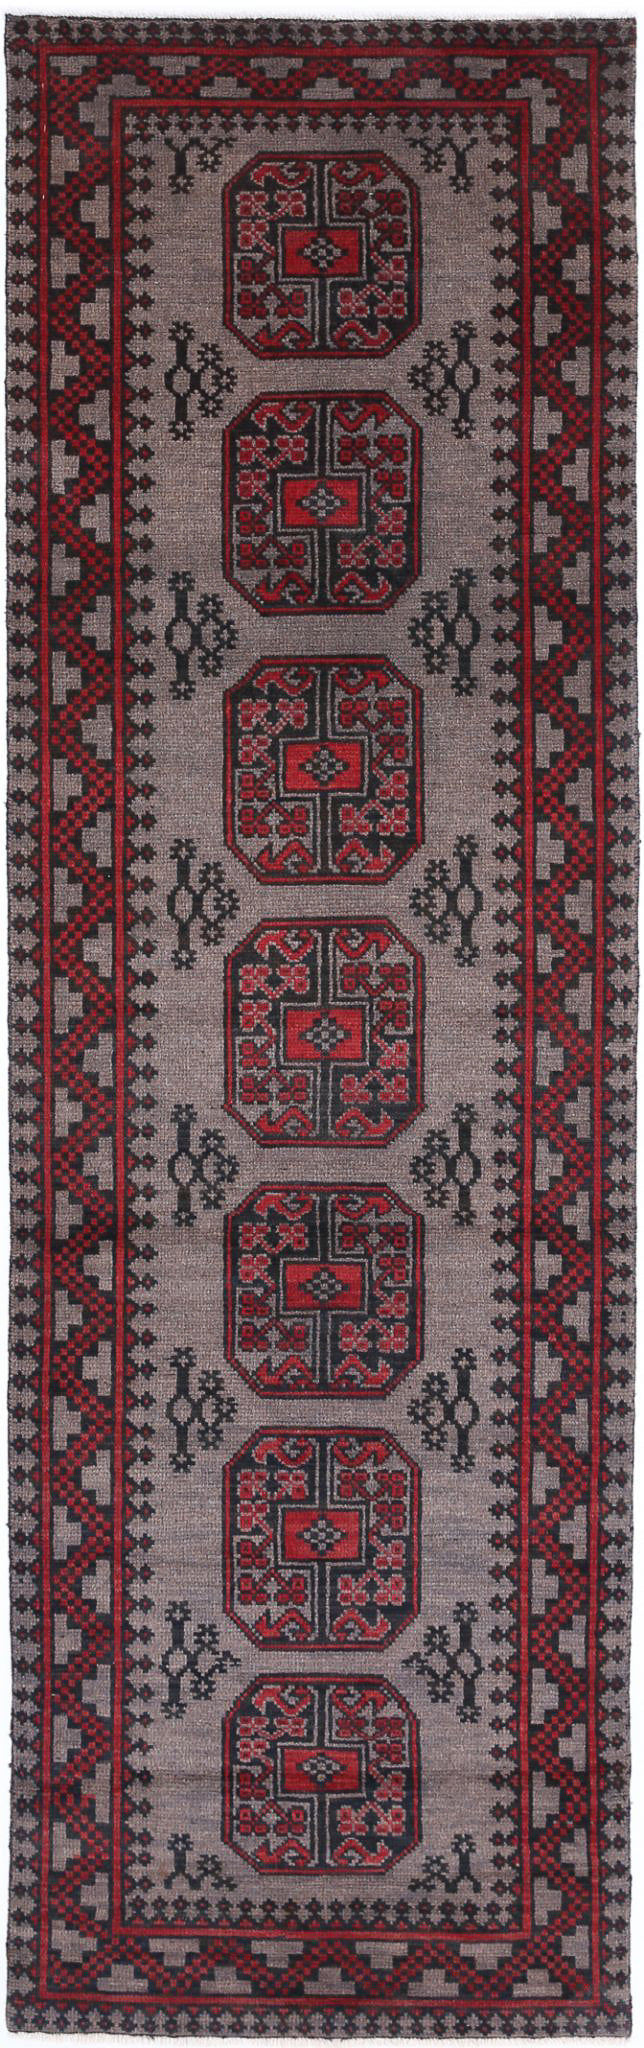 Revival-hand-knotted-gul-collection-wool-rug-5013996.jpg